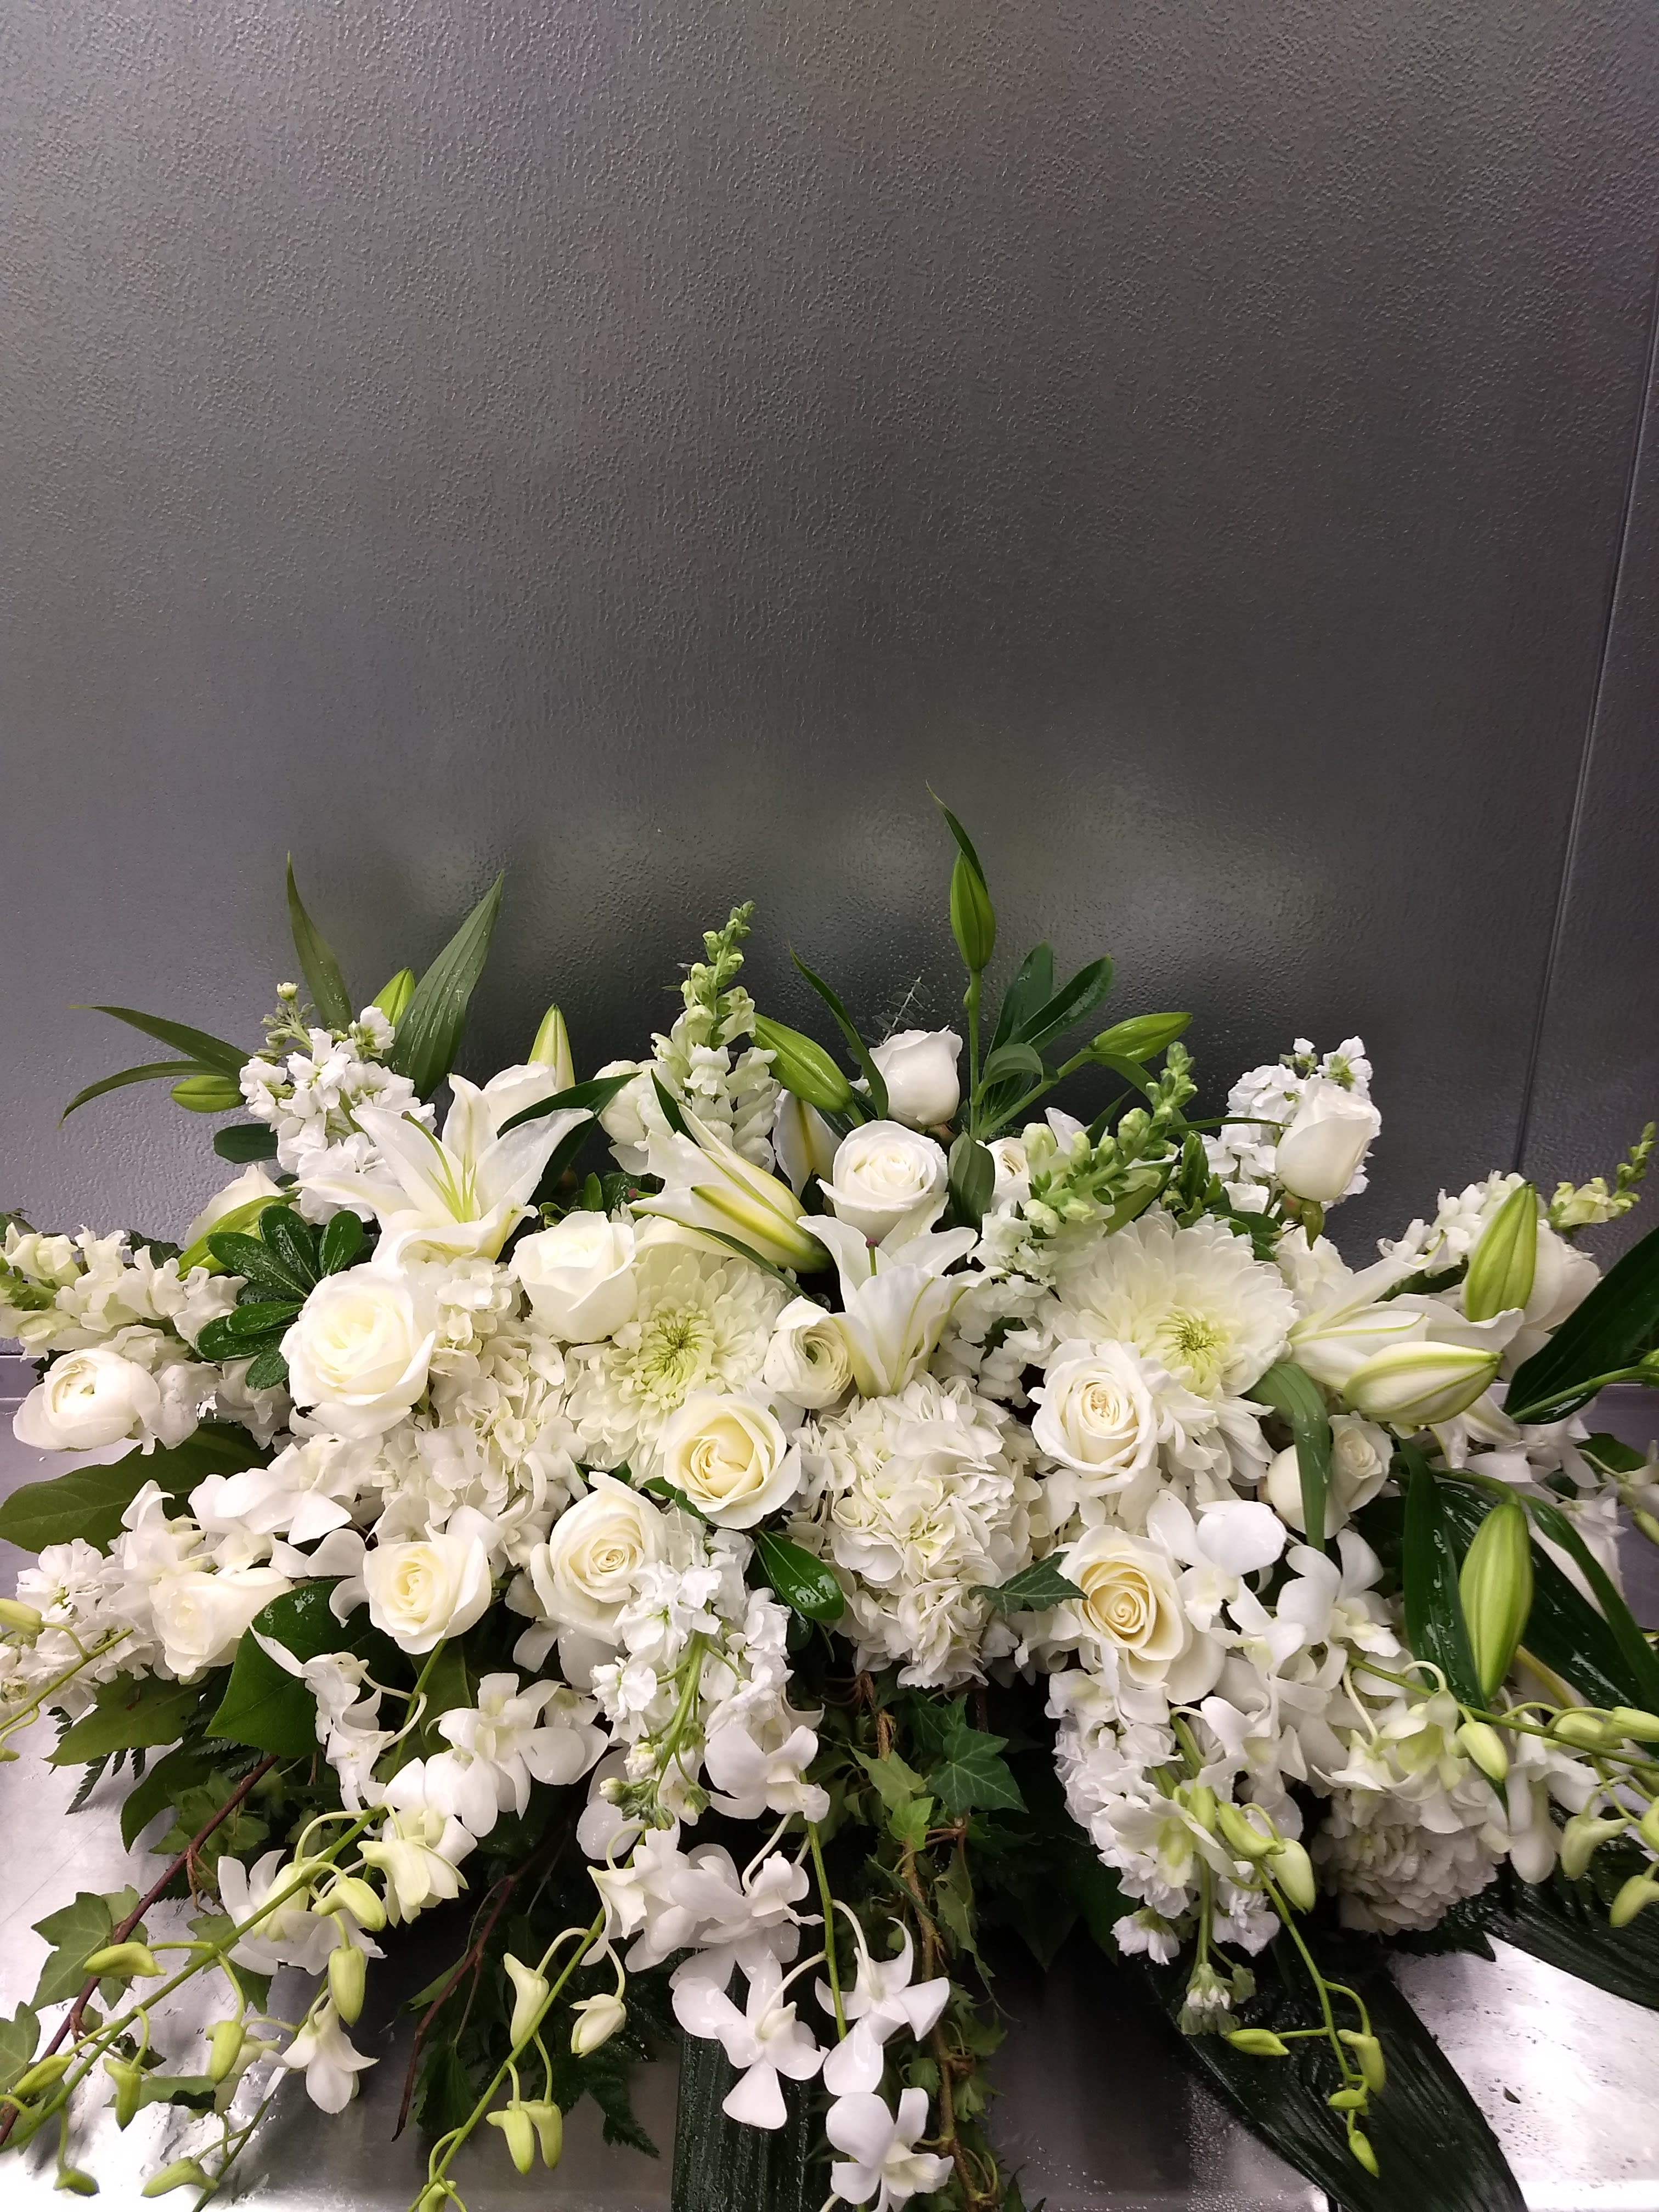 Elegant White Casket Spray - This elegant all white Casket Spray is overflowing with beautiful fragrant Lilies, Roses, orchids, Stock, and Snapdragons and more. This spray will fit on an open casket as well as when the casket is closed.  **** Please note: 48 hour notice MAYBE REQUIRED We custom-design this arrangement using best-of-day seasonal flowers. This image is a general representation of its size and style and may not feature the exact flowers shown. Due to disruptions in the global supply chain and staff shortages, we may have to make last minute substitutions to your selected design. If we need to make significant changes we will call you first to get your approval*** Thank you for understanding.